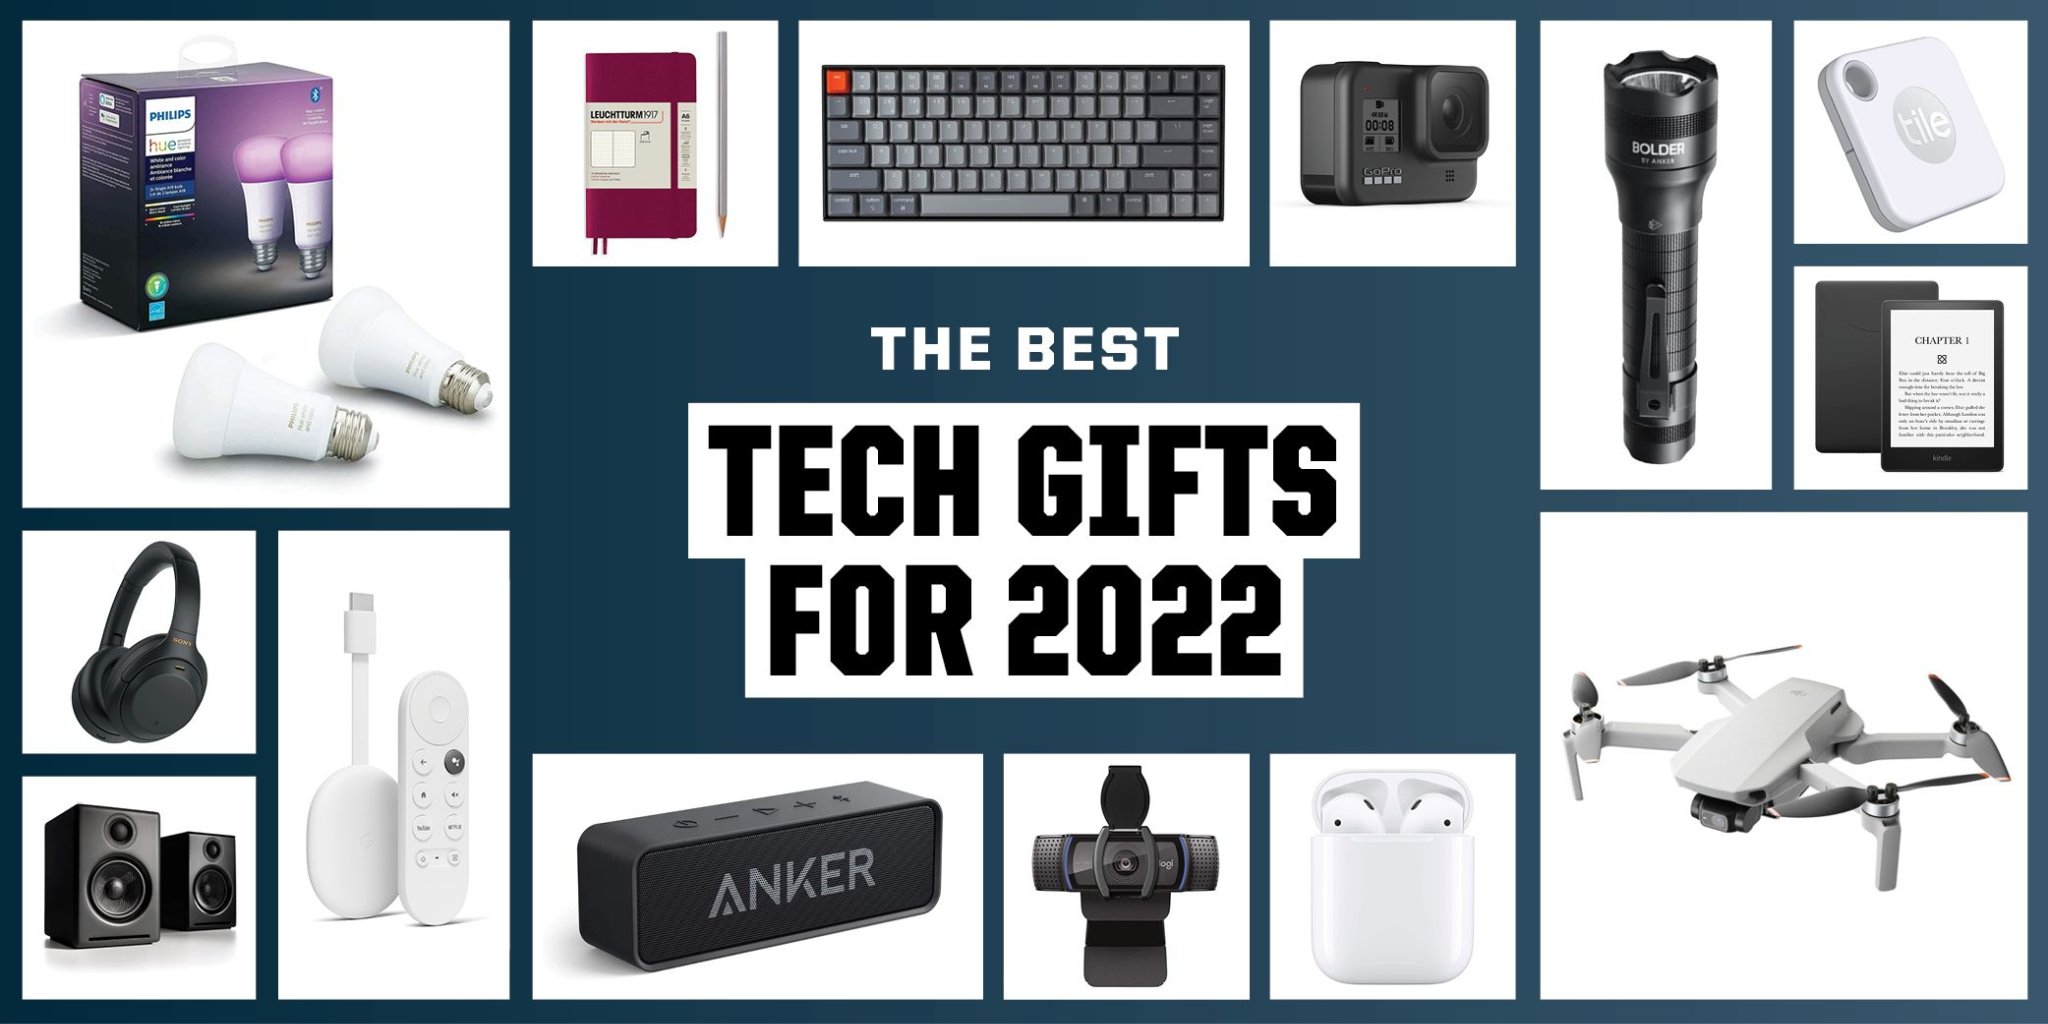 The Best Tech Gifts for the Gadget-Obsessed